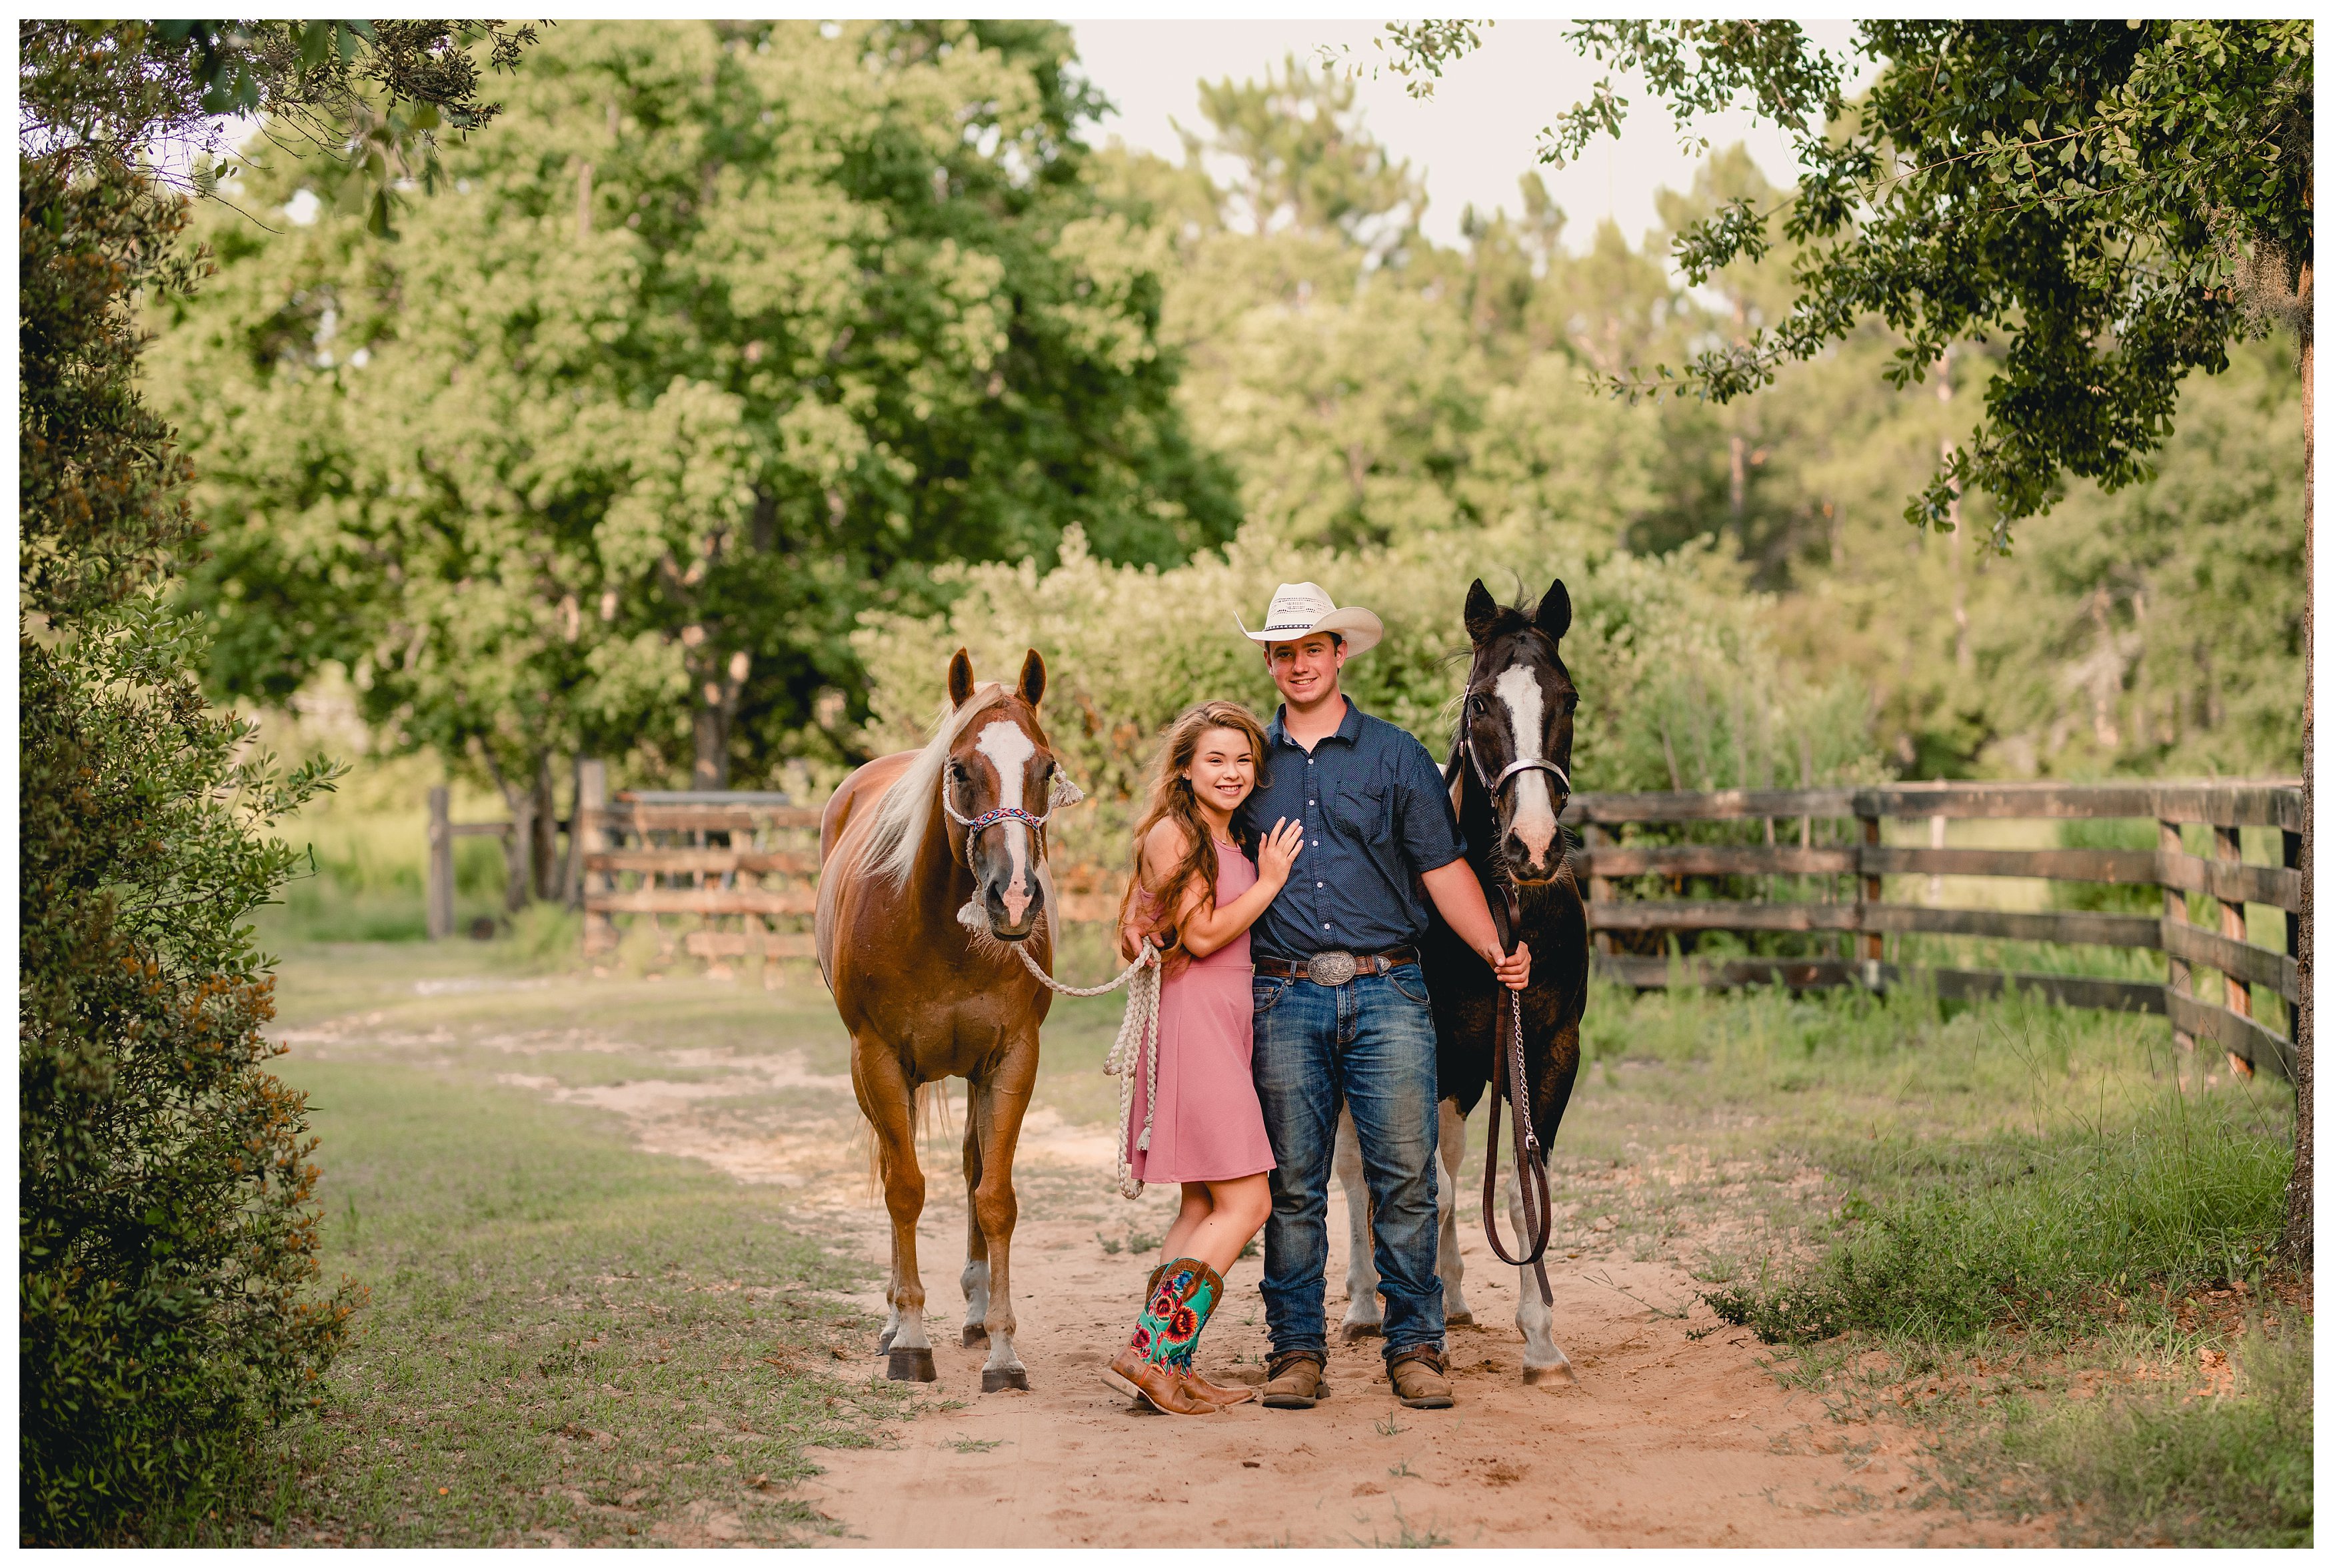 Engagement and wedding photographer in the Jacksonville area also specializes in horses.